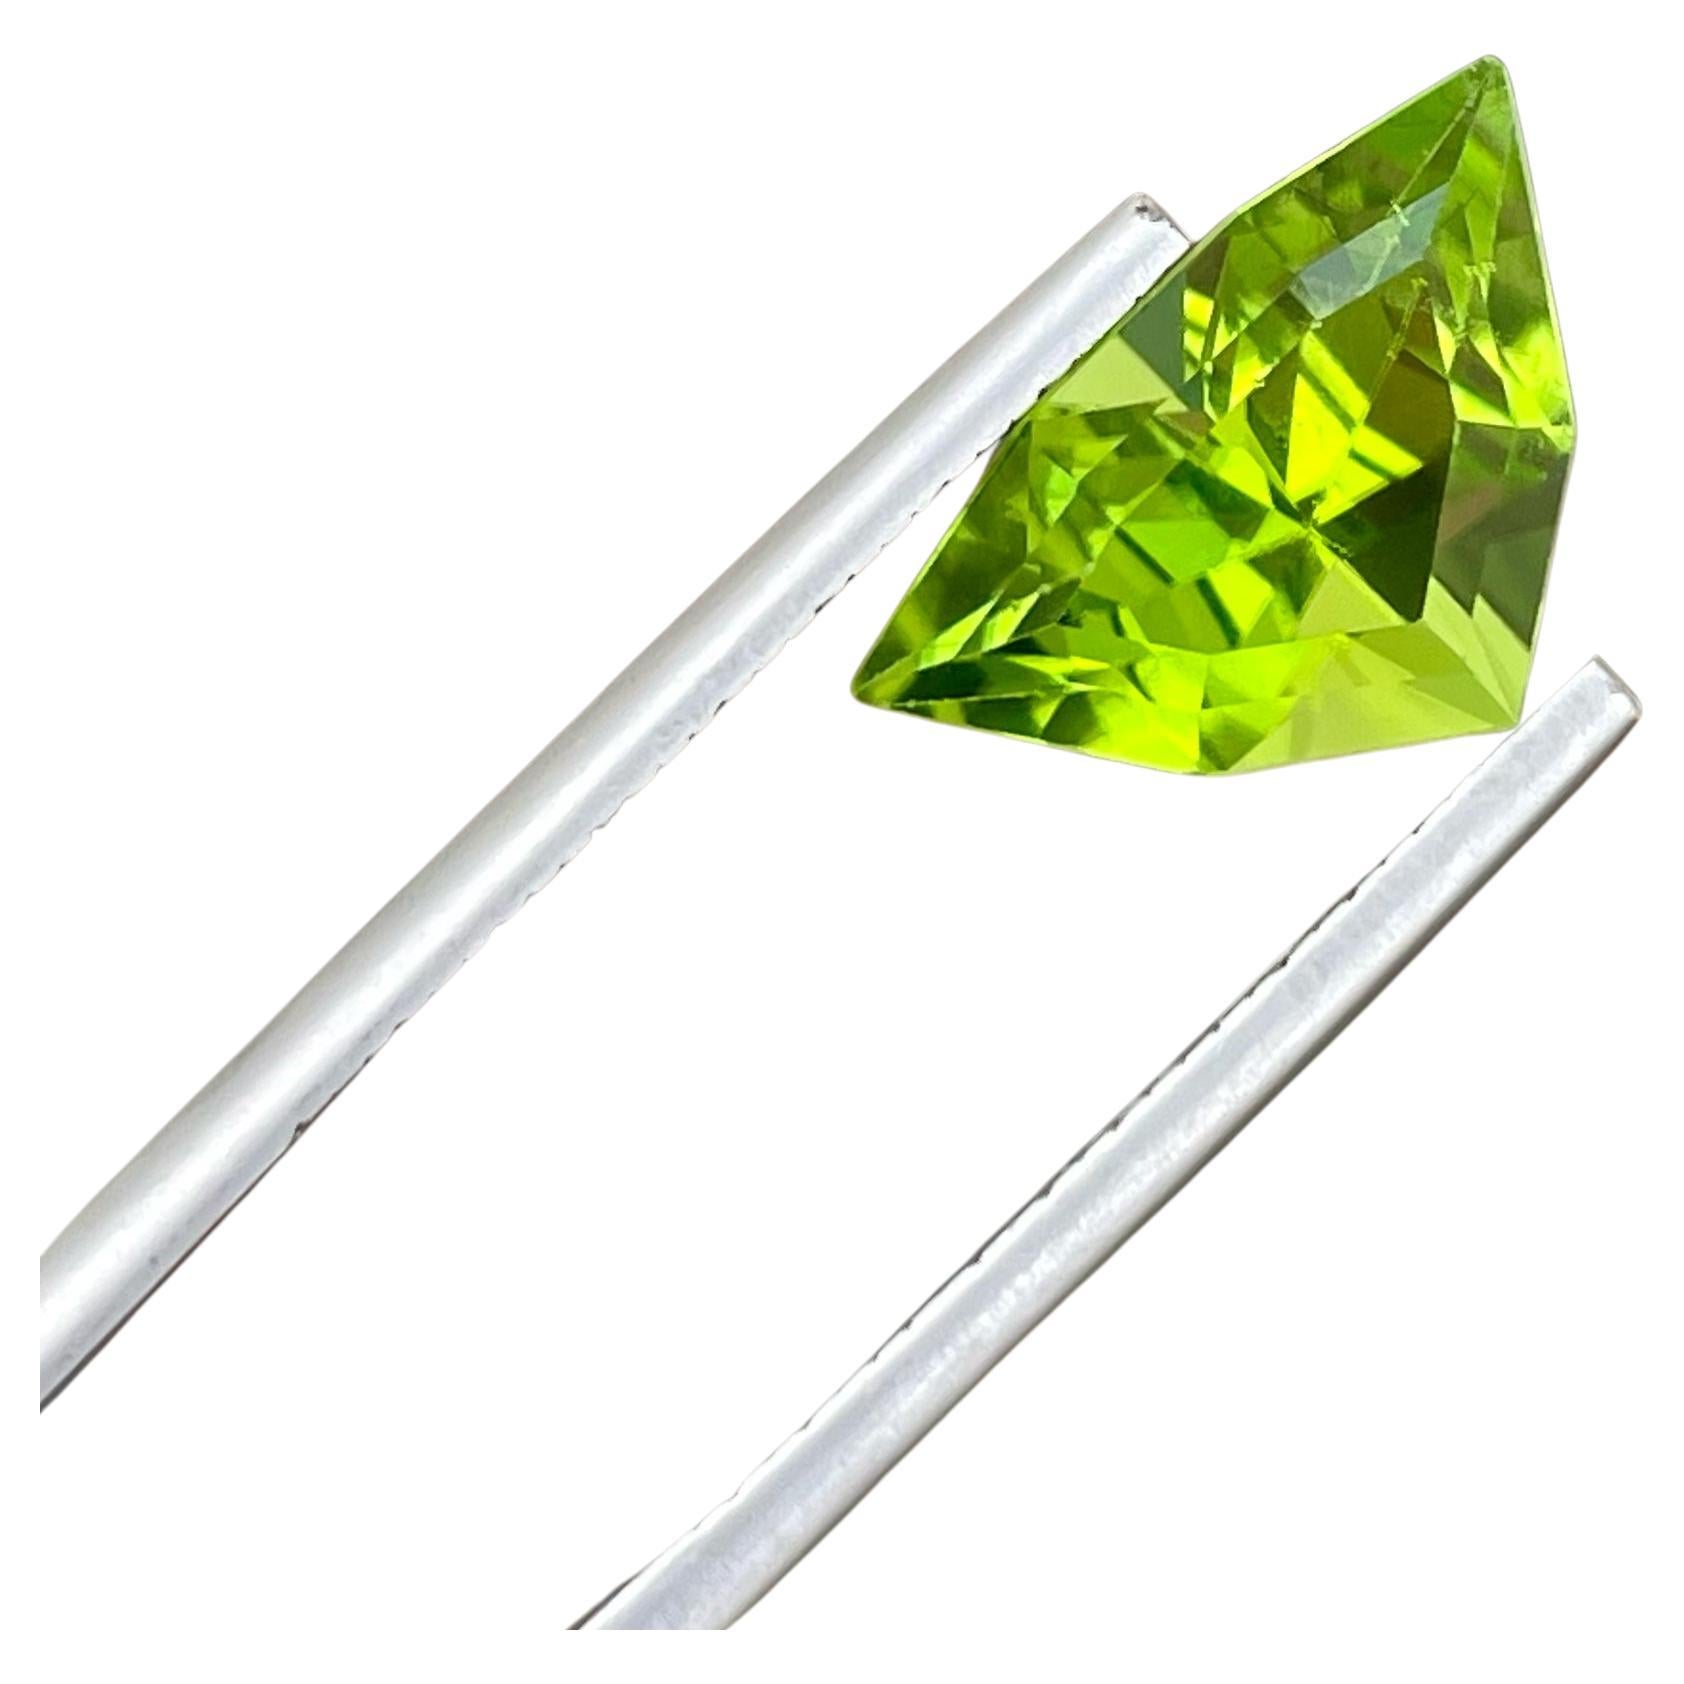 The Rare and Unusual Shaped Peridot Gemstone Collection Guaranteed to Mesmerize